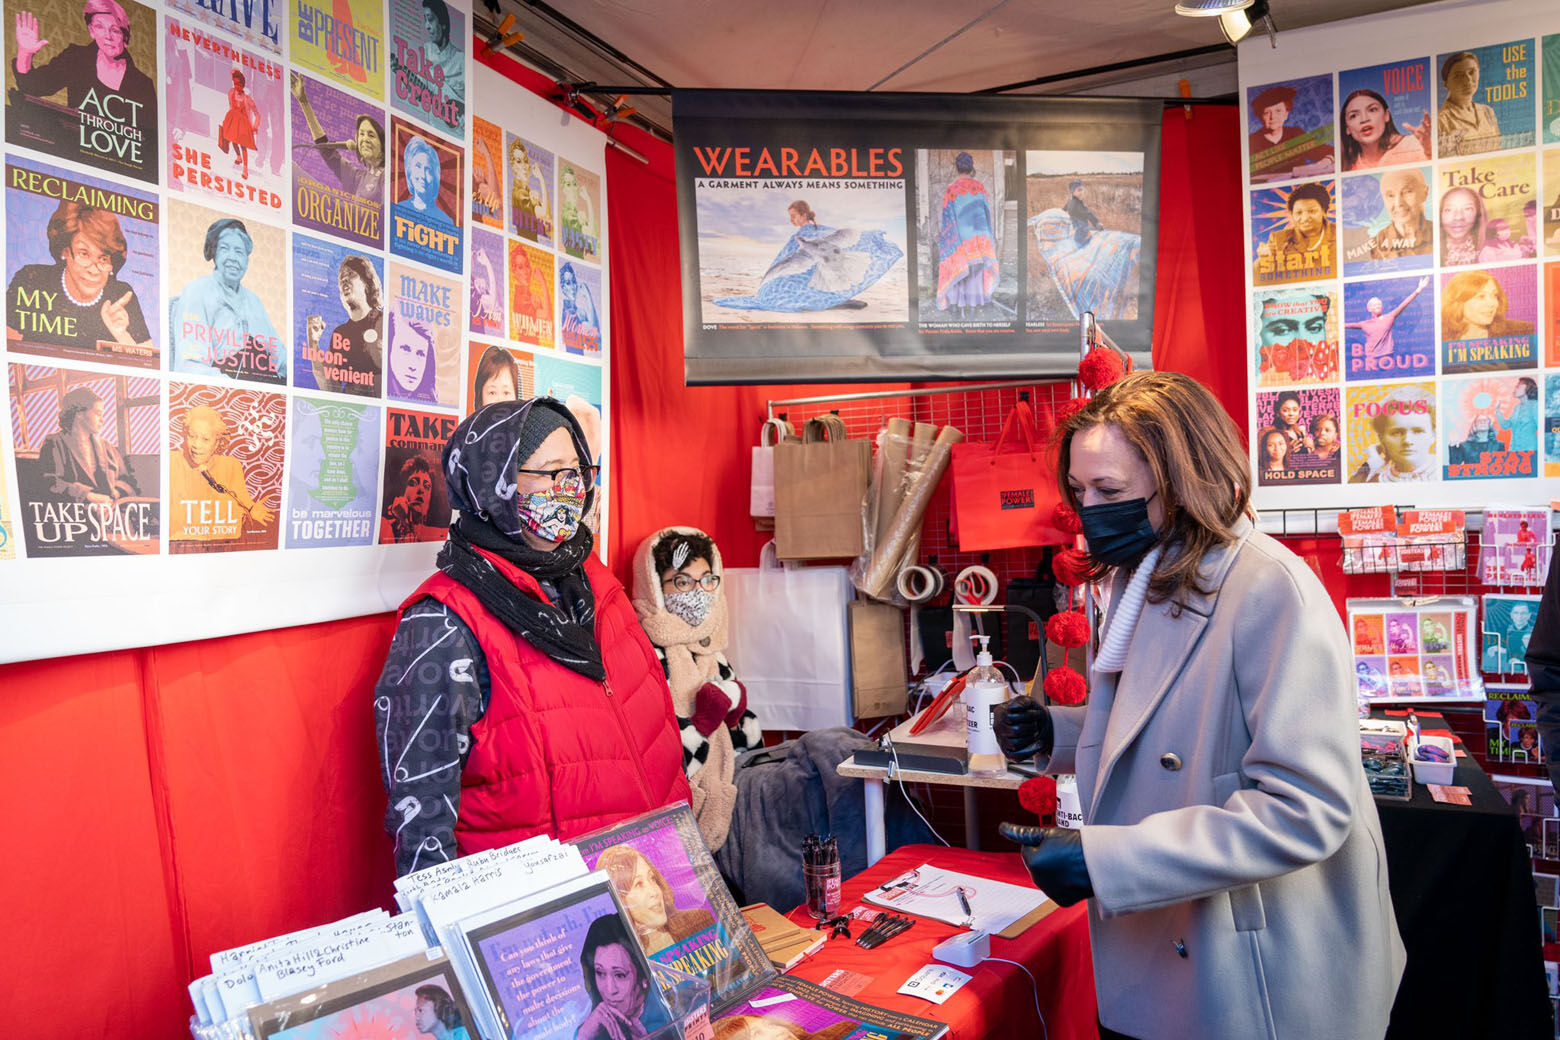 For Small Business Saturday, VP Harris and family drop by DC’s Downtown Holiday Market